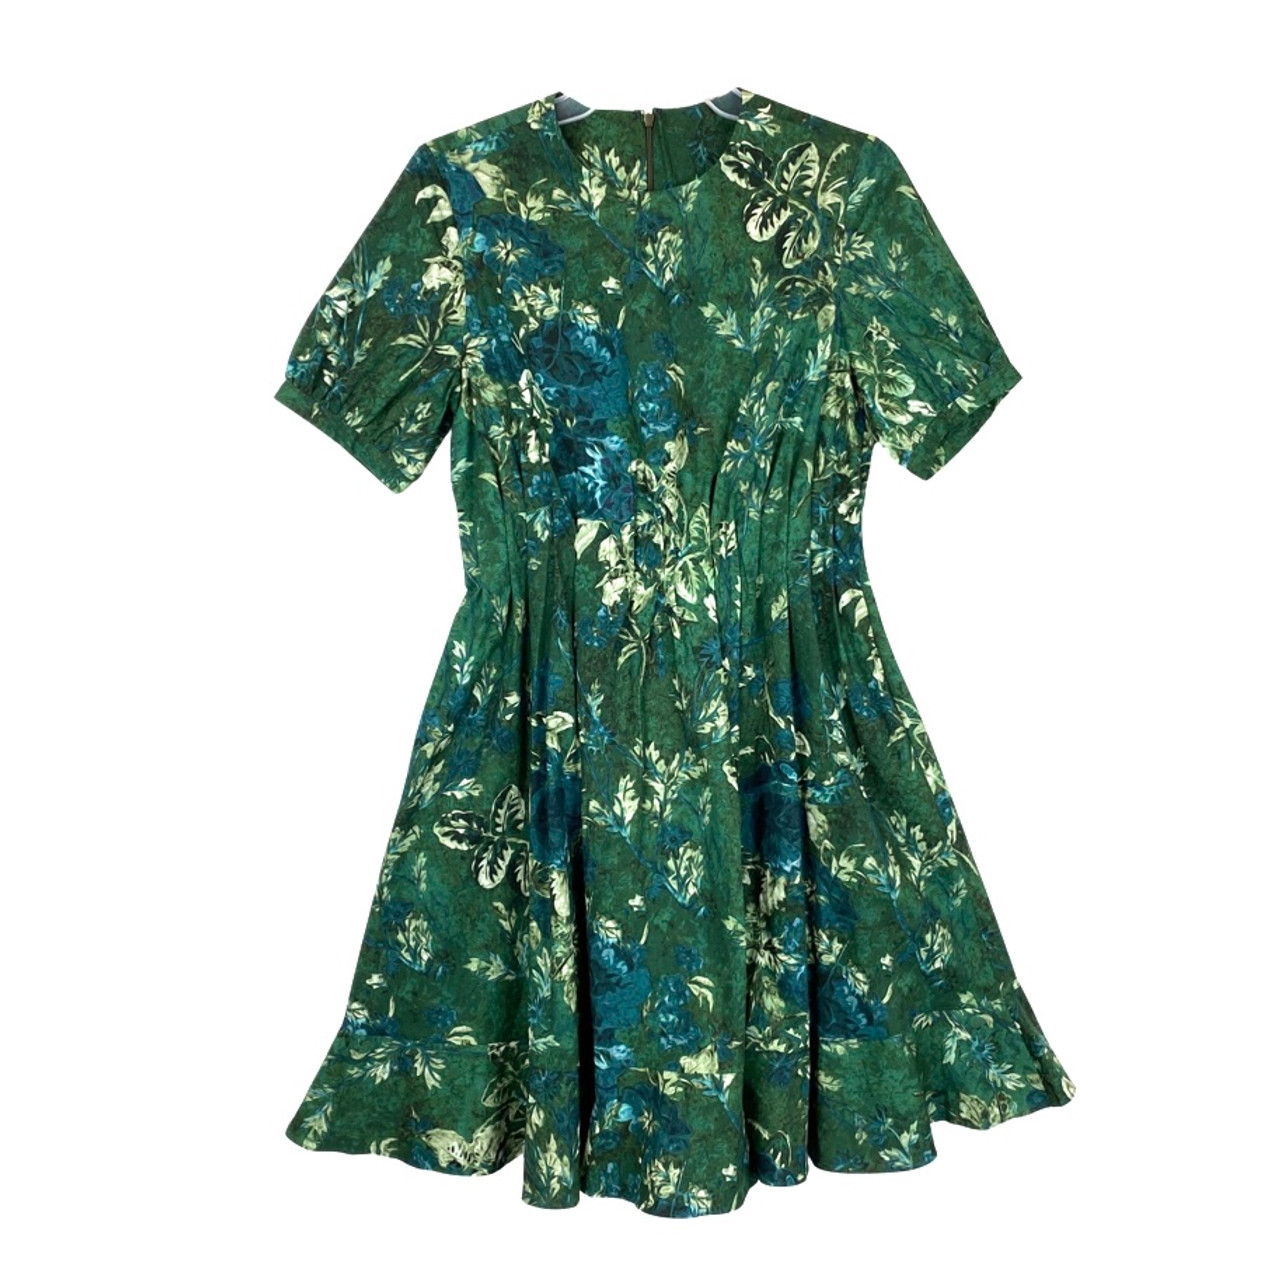 Peruvian Connection Short Sleeved Floral Midi Dress